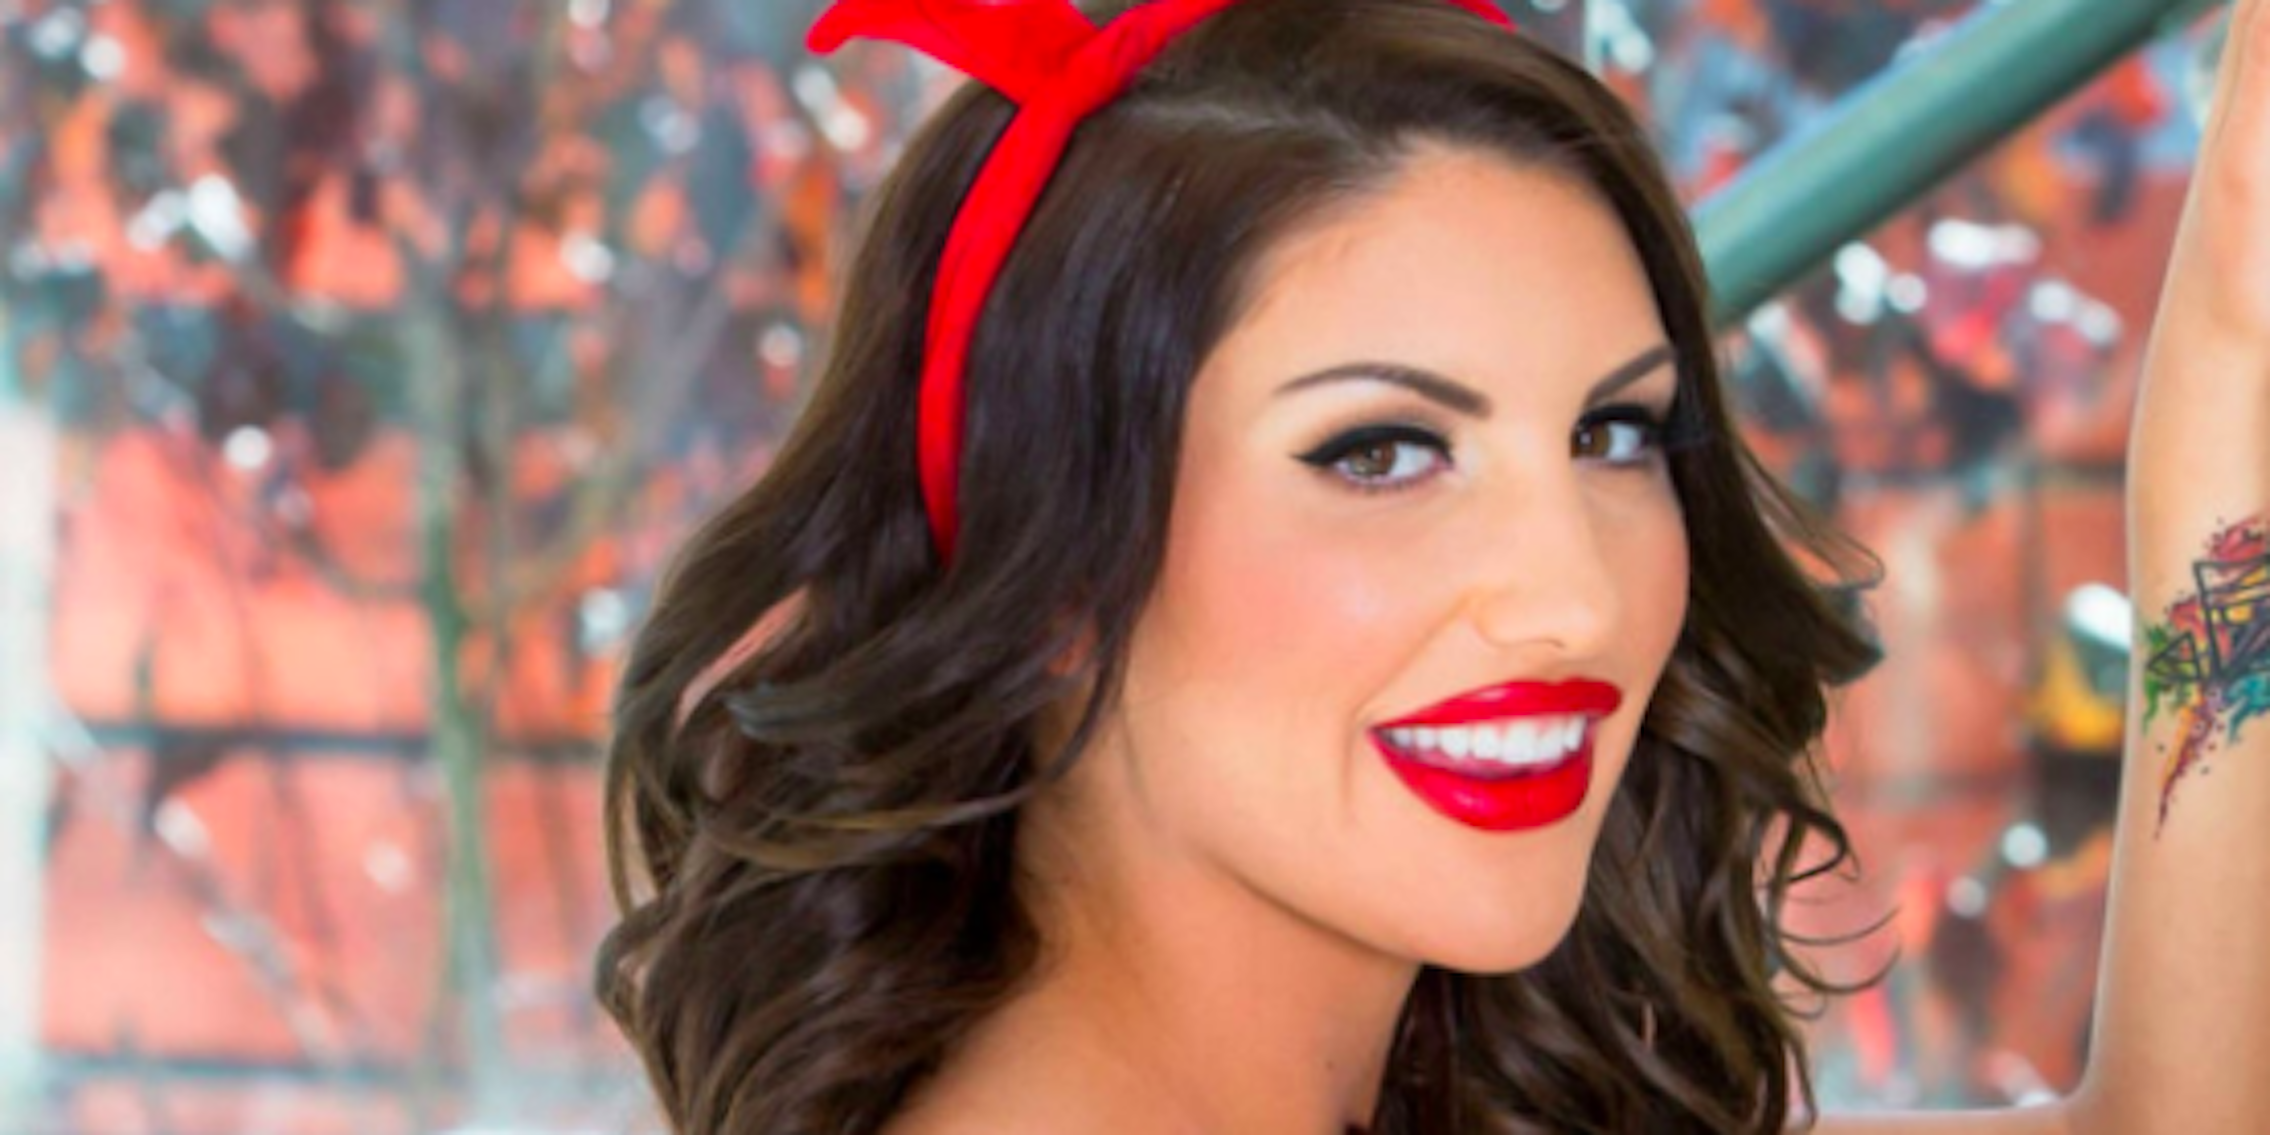 August Porn Star - Fellow Porn Stars Say August Ames' Death is Connected to Cyberbullying